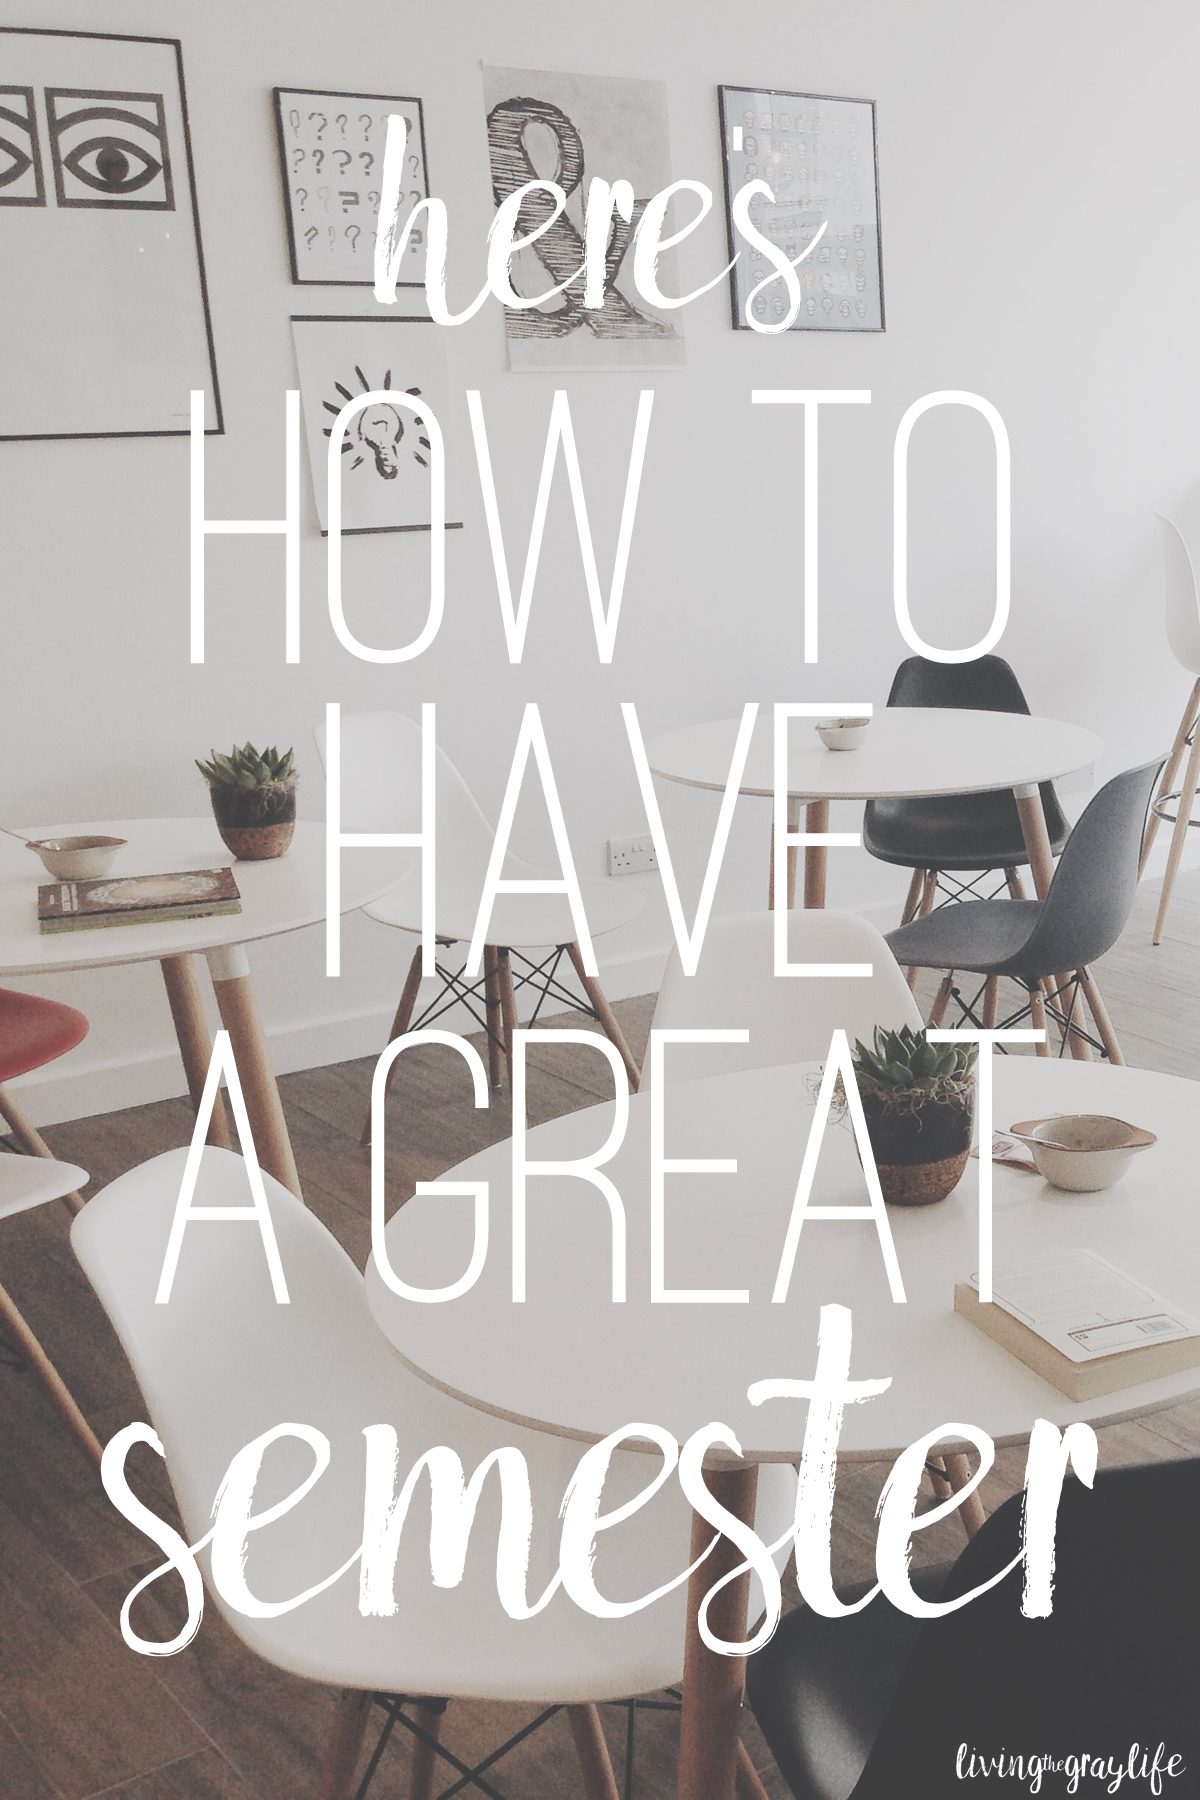 Here’s How to Have A Great Semester